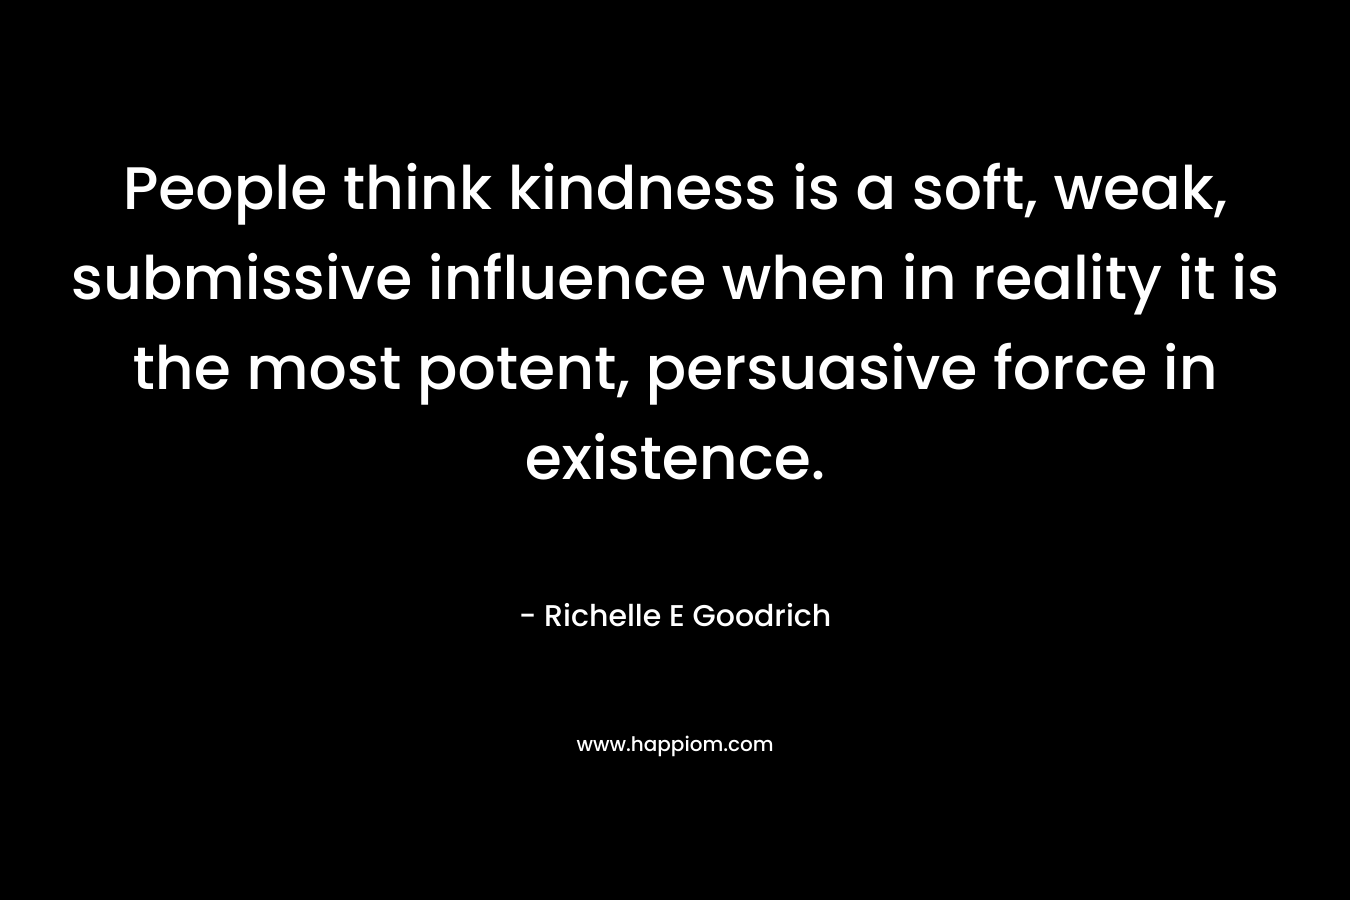 People think kindness is a soft, weak, submissive influence when in reality it is the most potent, persuasive force in existence. – Richelle E Goodrich